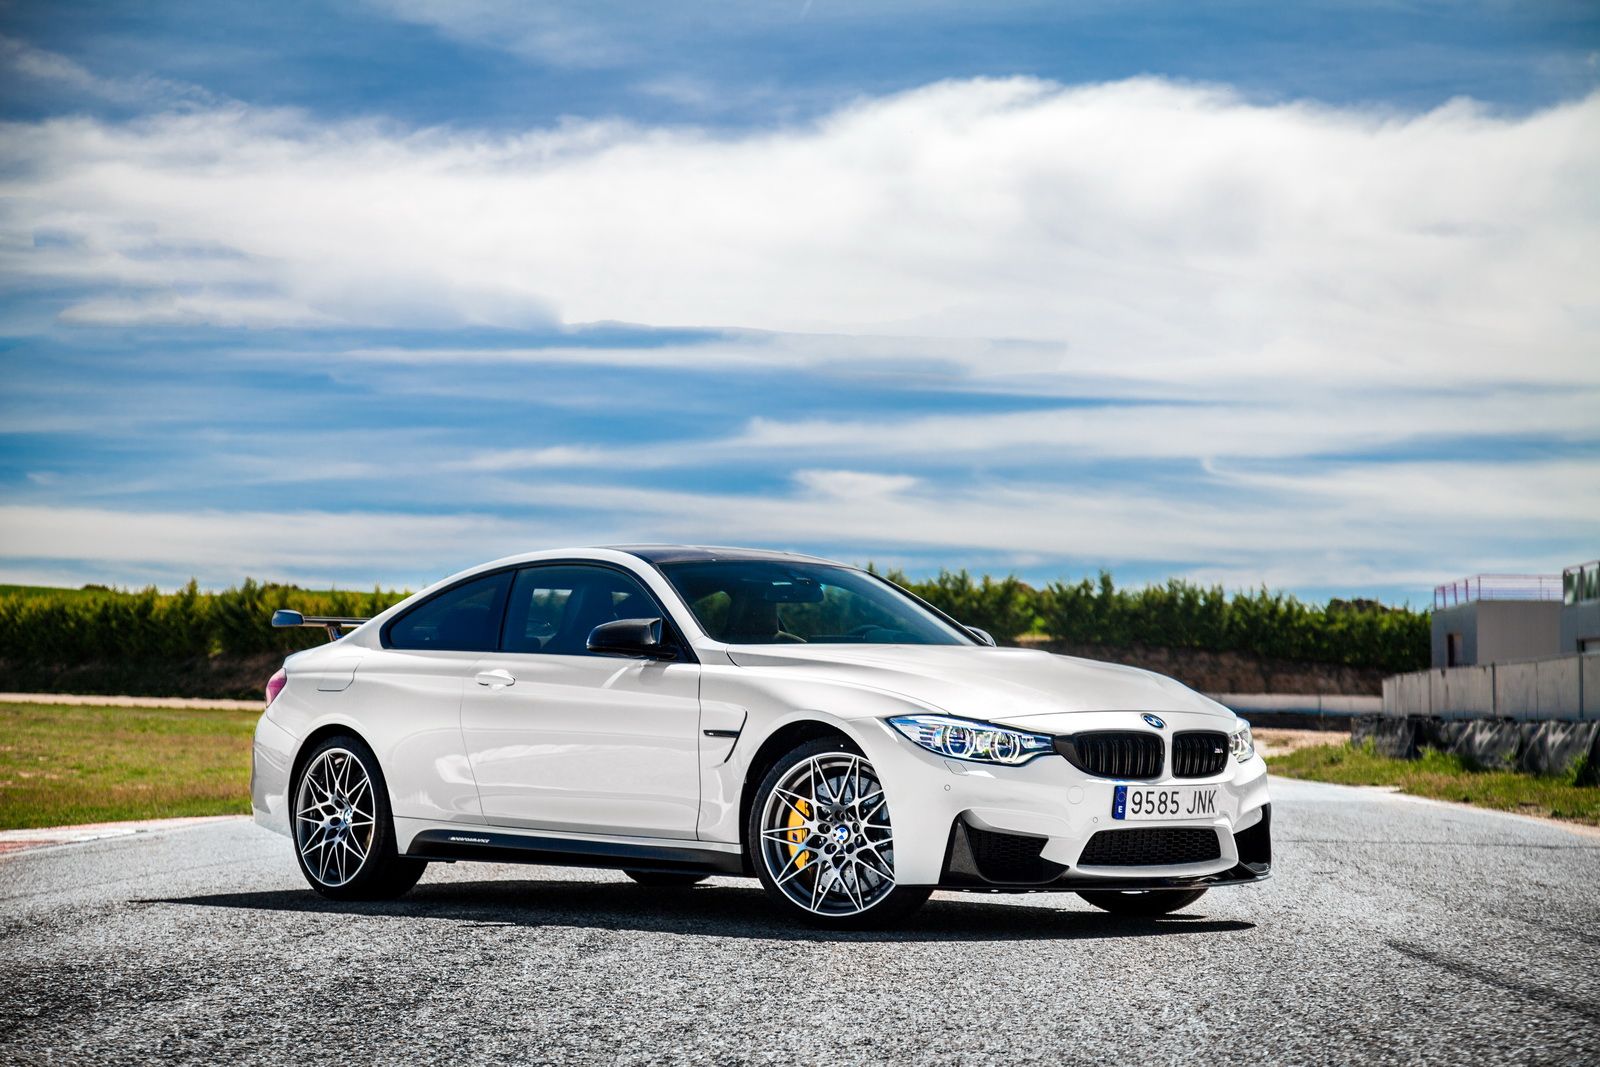 Bmw S New M4 Cs Limited Edition Is Tempting But Pricey Image